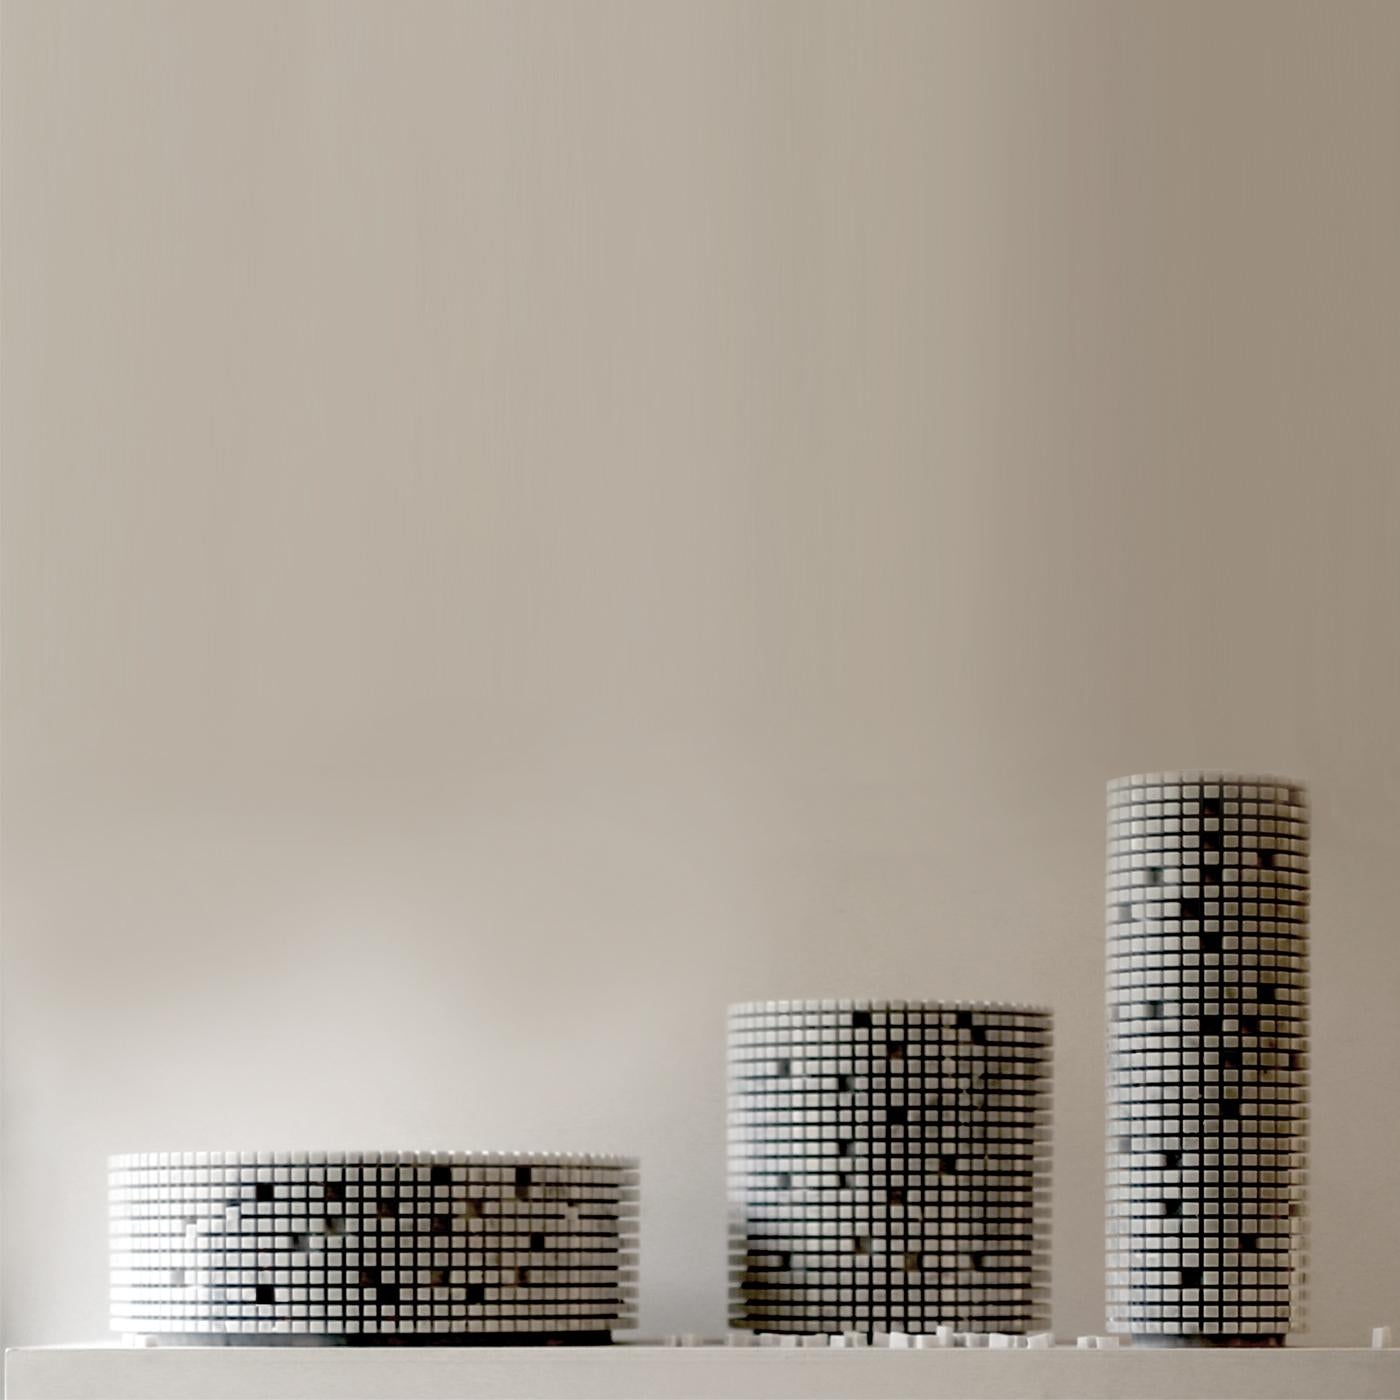 The big low version of the Pixel design in white Carrara marble. Paolo Ulian used a single block to form the tall slim circular shape of the body and create the pixelated exterior that can be either kept or personalized by breaking off individual